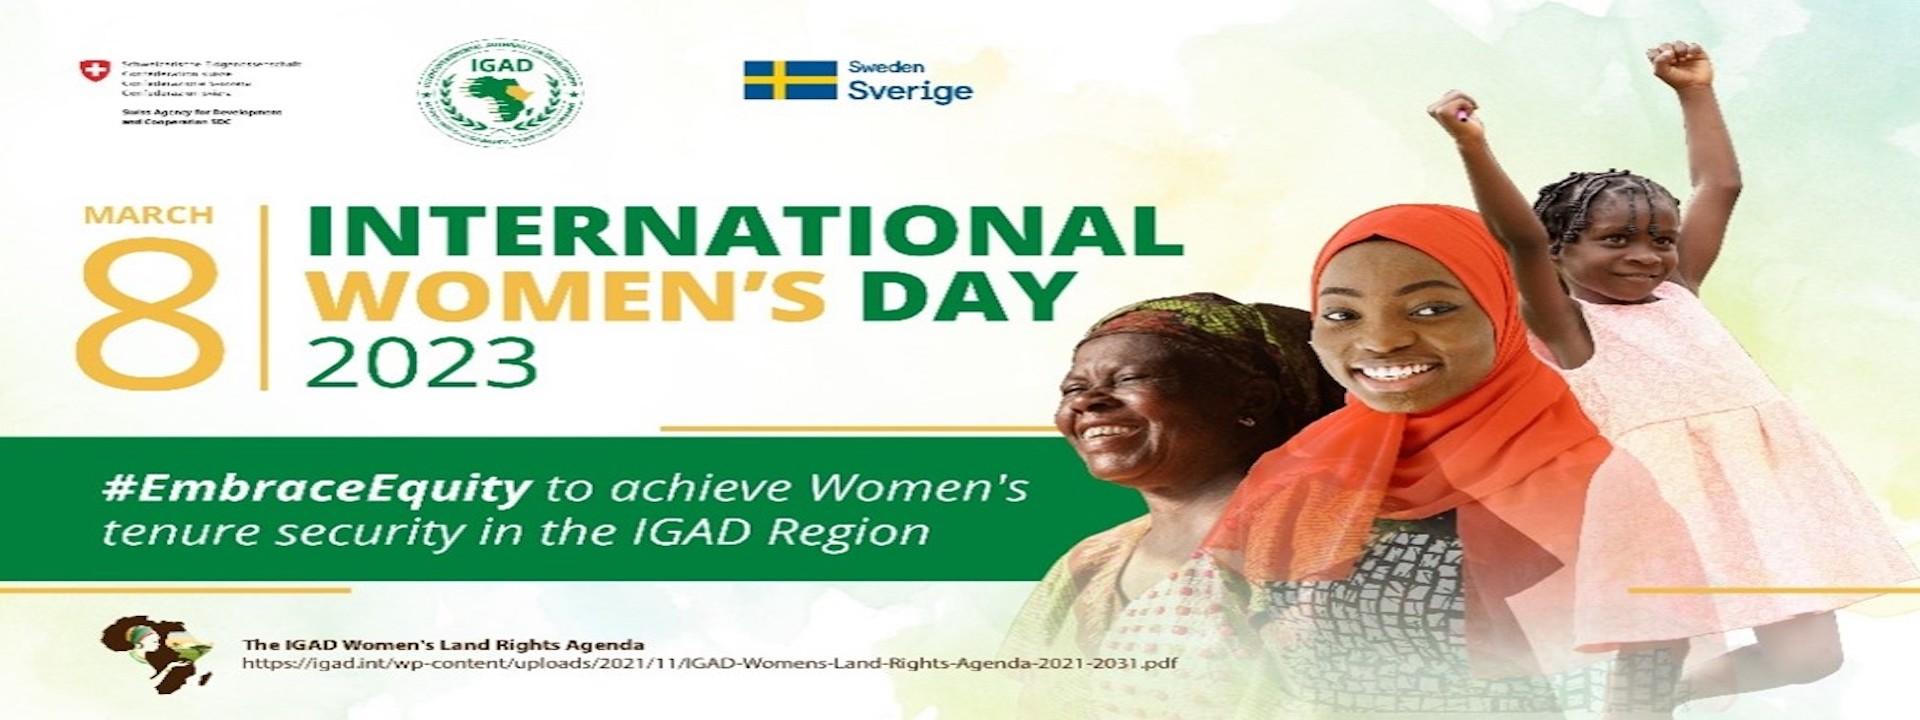 ‘Embrace Equity’ to Achieve Women’s Land Tenure Security in the IGAD Region